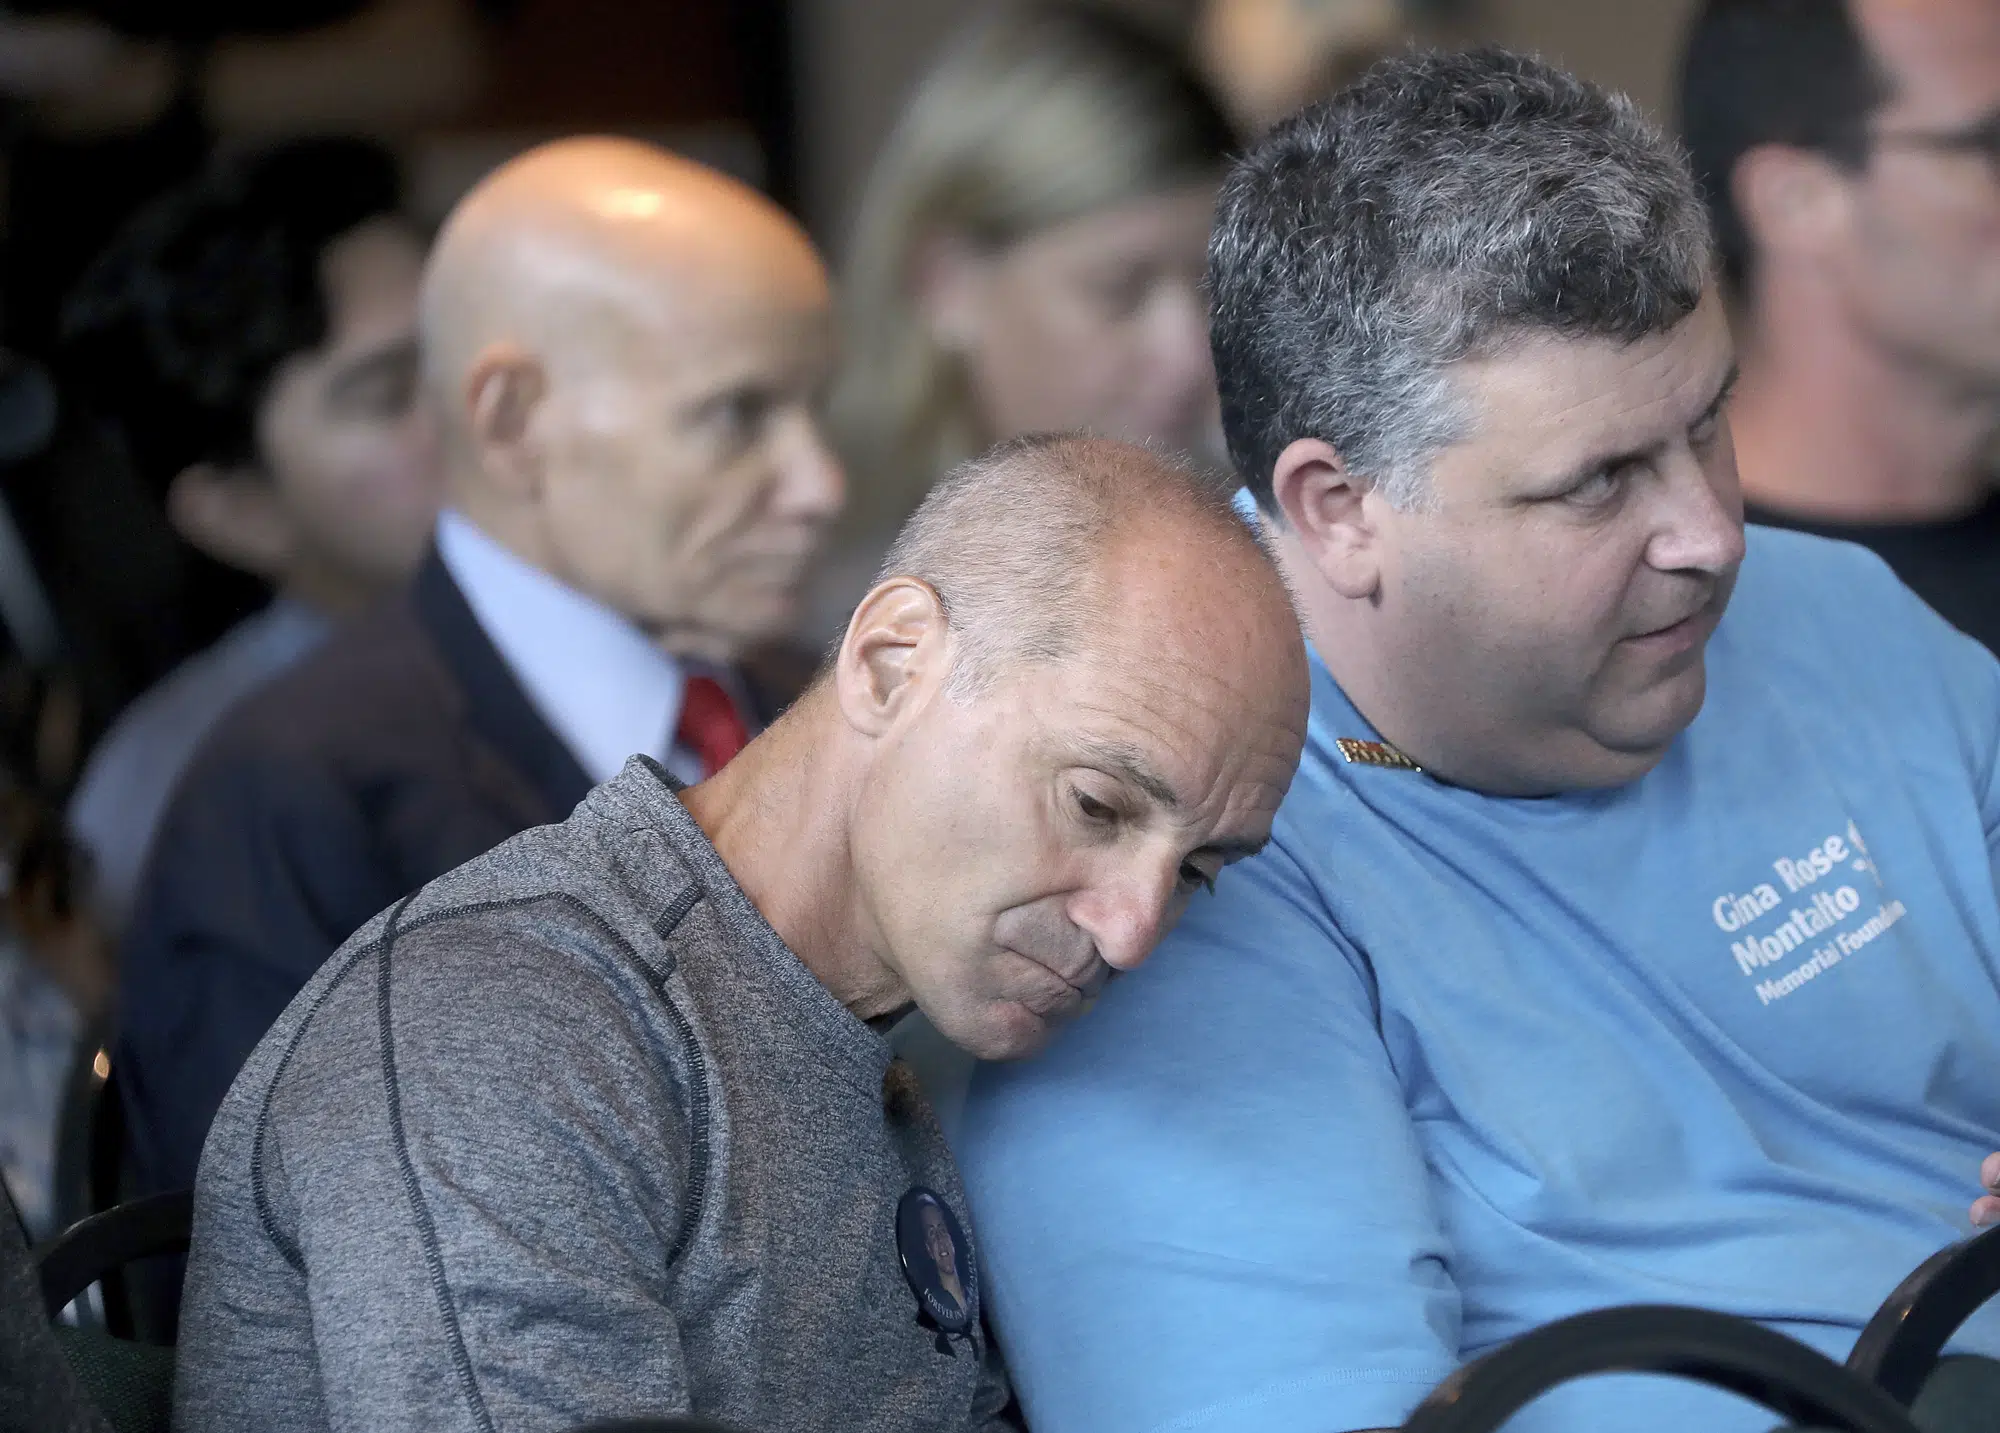 FILE - Mitch Dworet, left, the father of victim Nick Dworet and Tony Montalto, the father of shooting victim Gina Montaldo watch videos from the school shooting during the Marjory Stoneman Douglas High School Public Safety Commission meeting Thursday, Nov 15, 2018 in Sunrise, Fla. (Mike Stocker/South Florida Sun-Sentinel via AP, Pool, File)